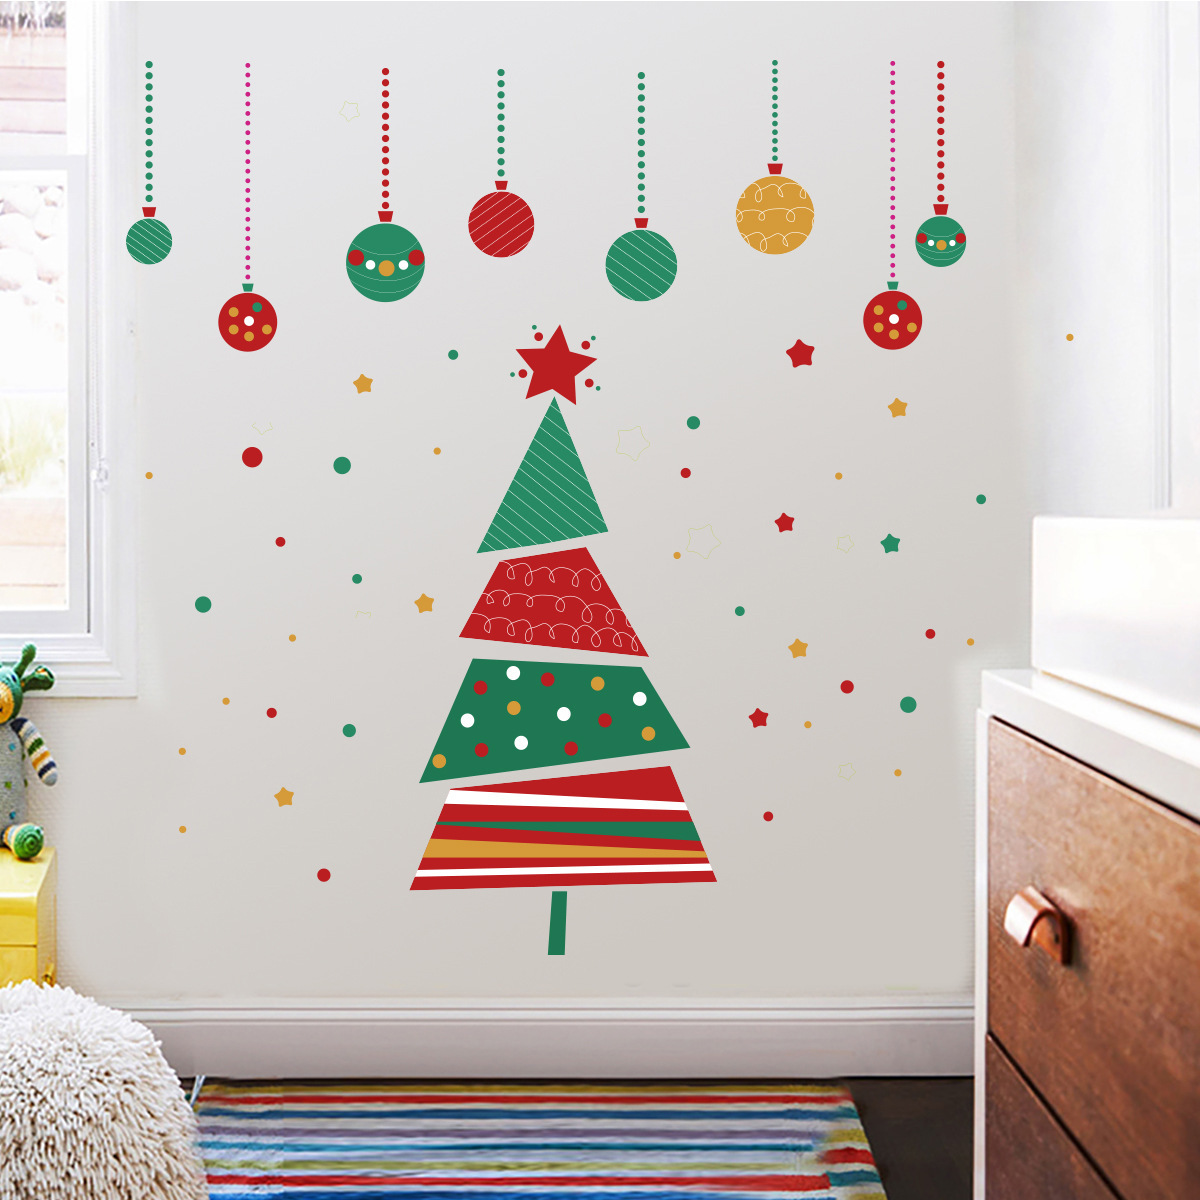 Christmas Wall Stickers Christmas Tree Wall Decal from China